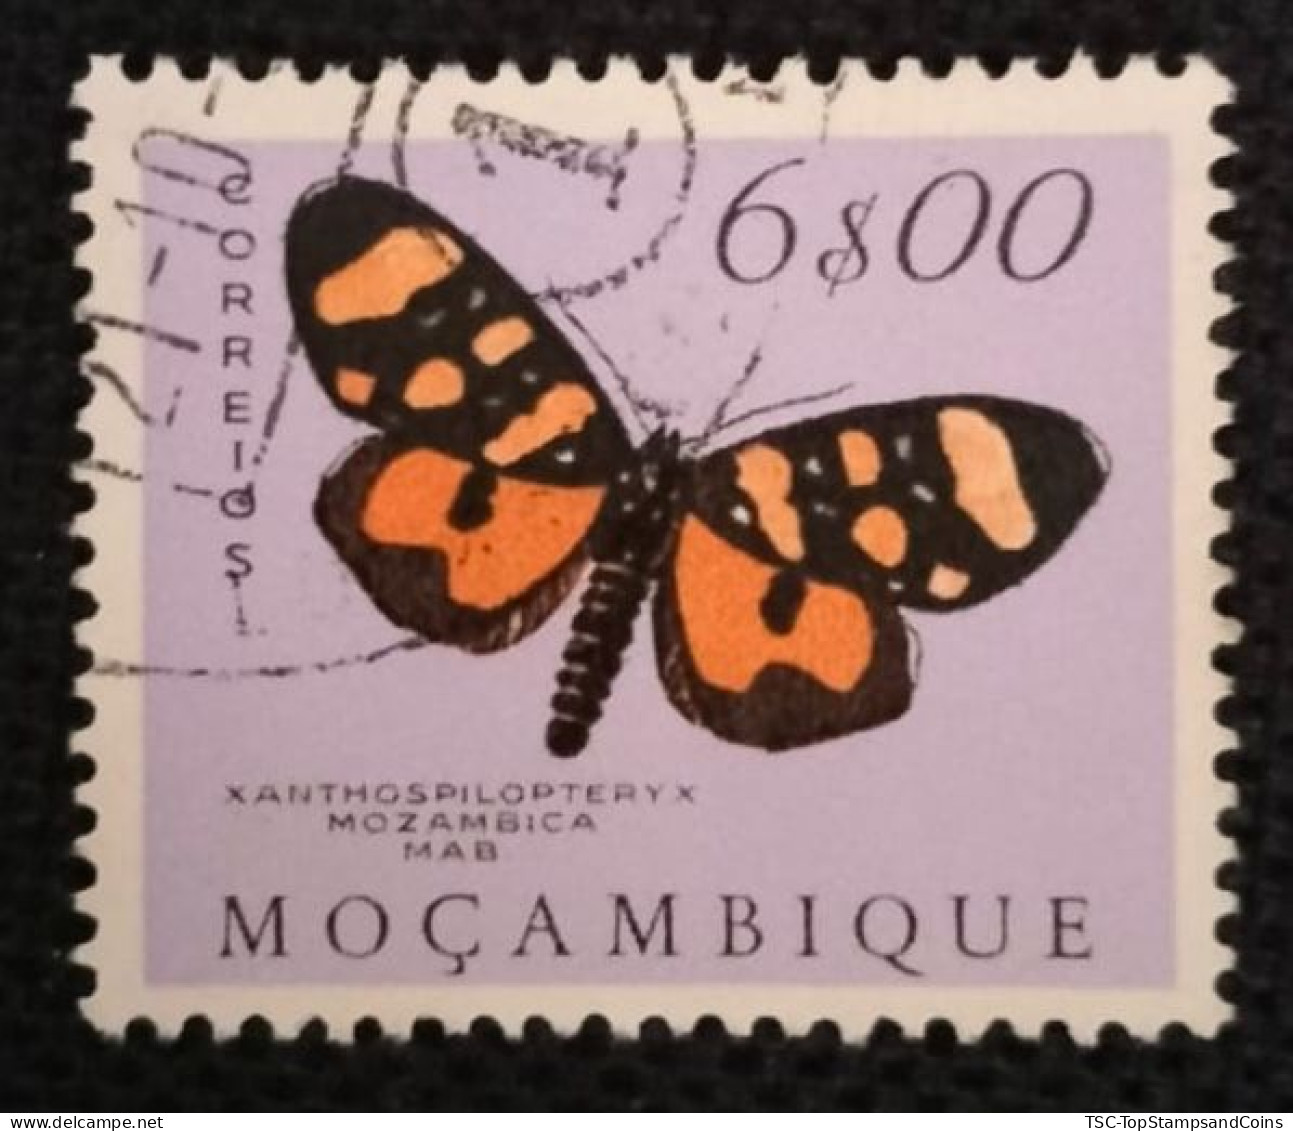 MOZPO0404UD - Mozambique Butterflies - 6$00 Used Stamp - Mozambique - 1953 - Mosambik